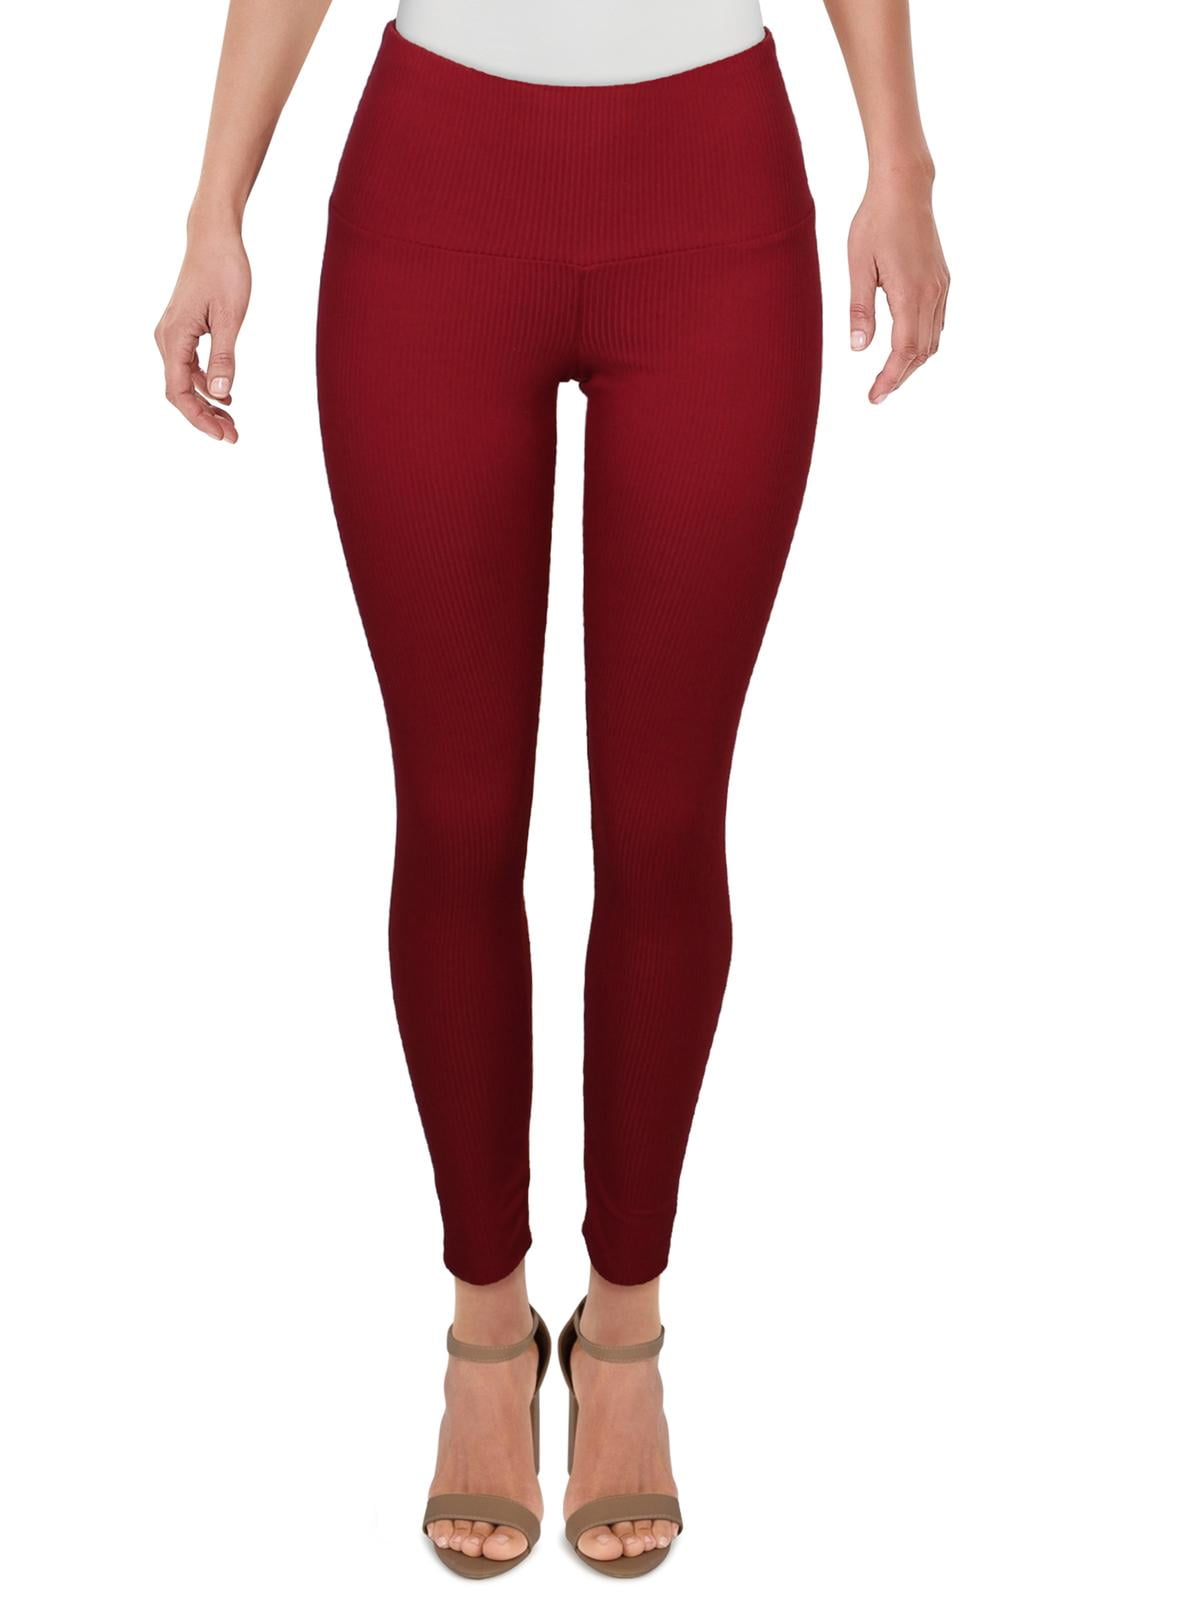 Womens Ribbed Flared Leggings For Sports, Leisure, Gym, Dance, And Yoga In  Red From M2l3, $25.53